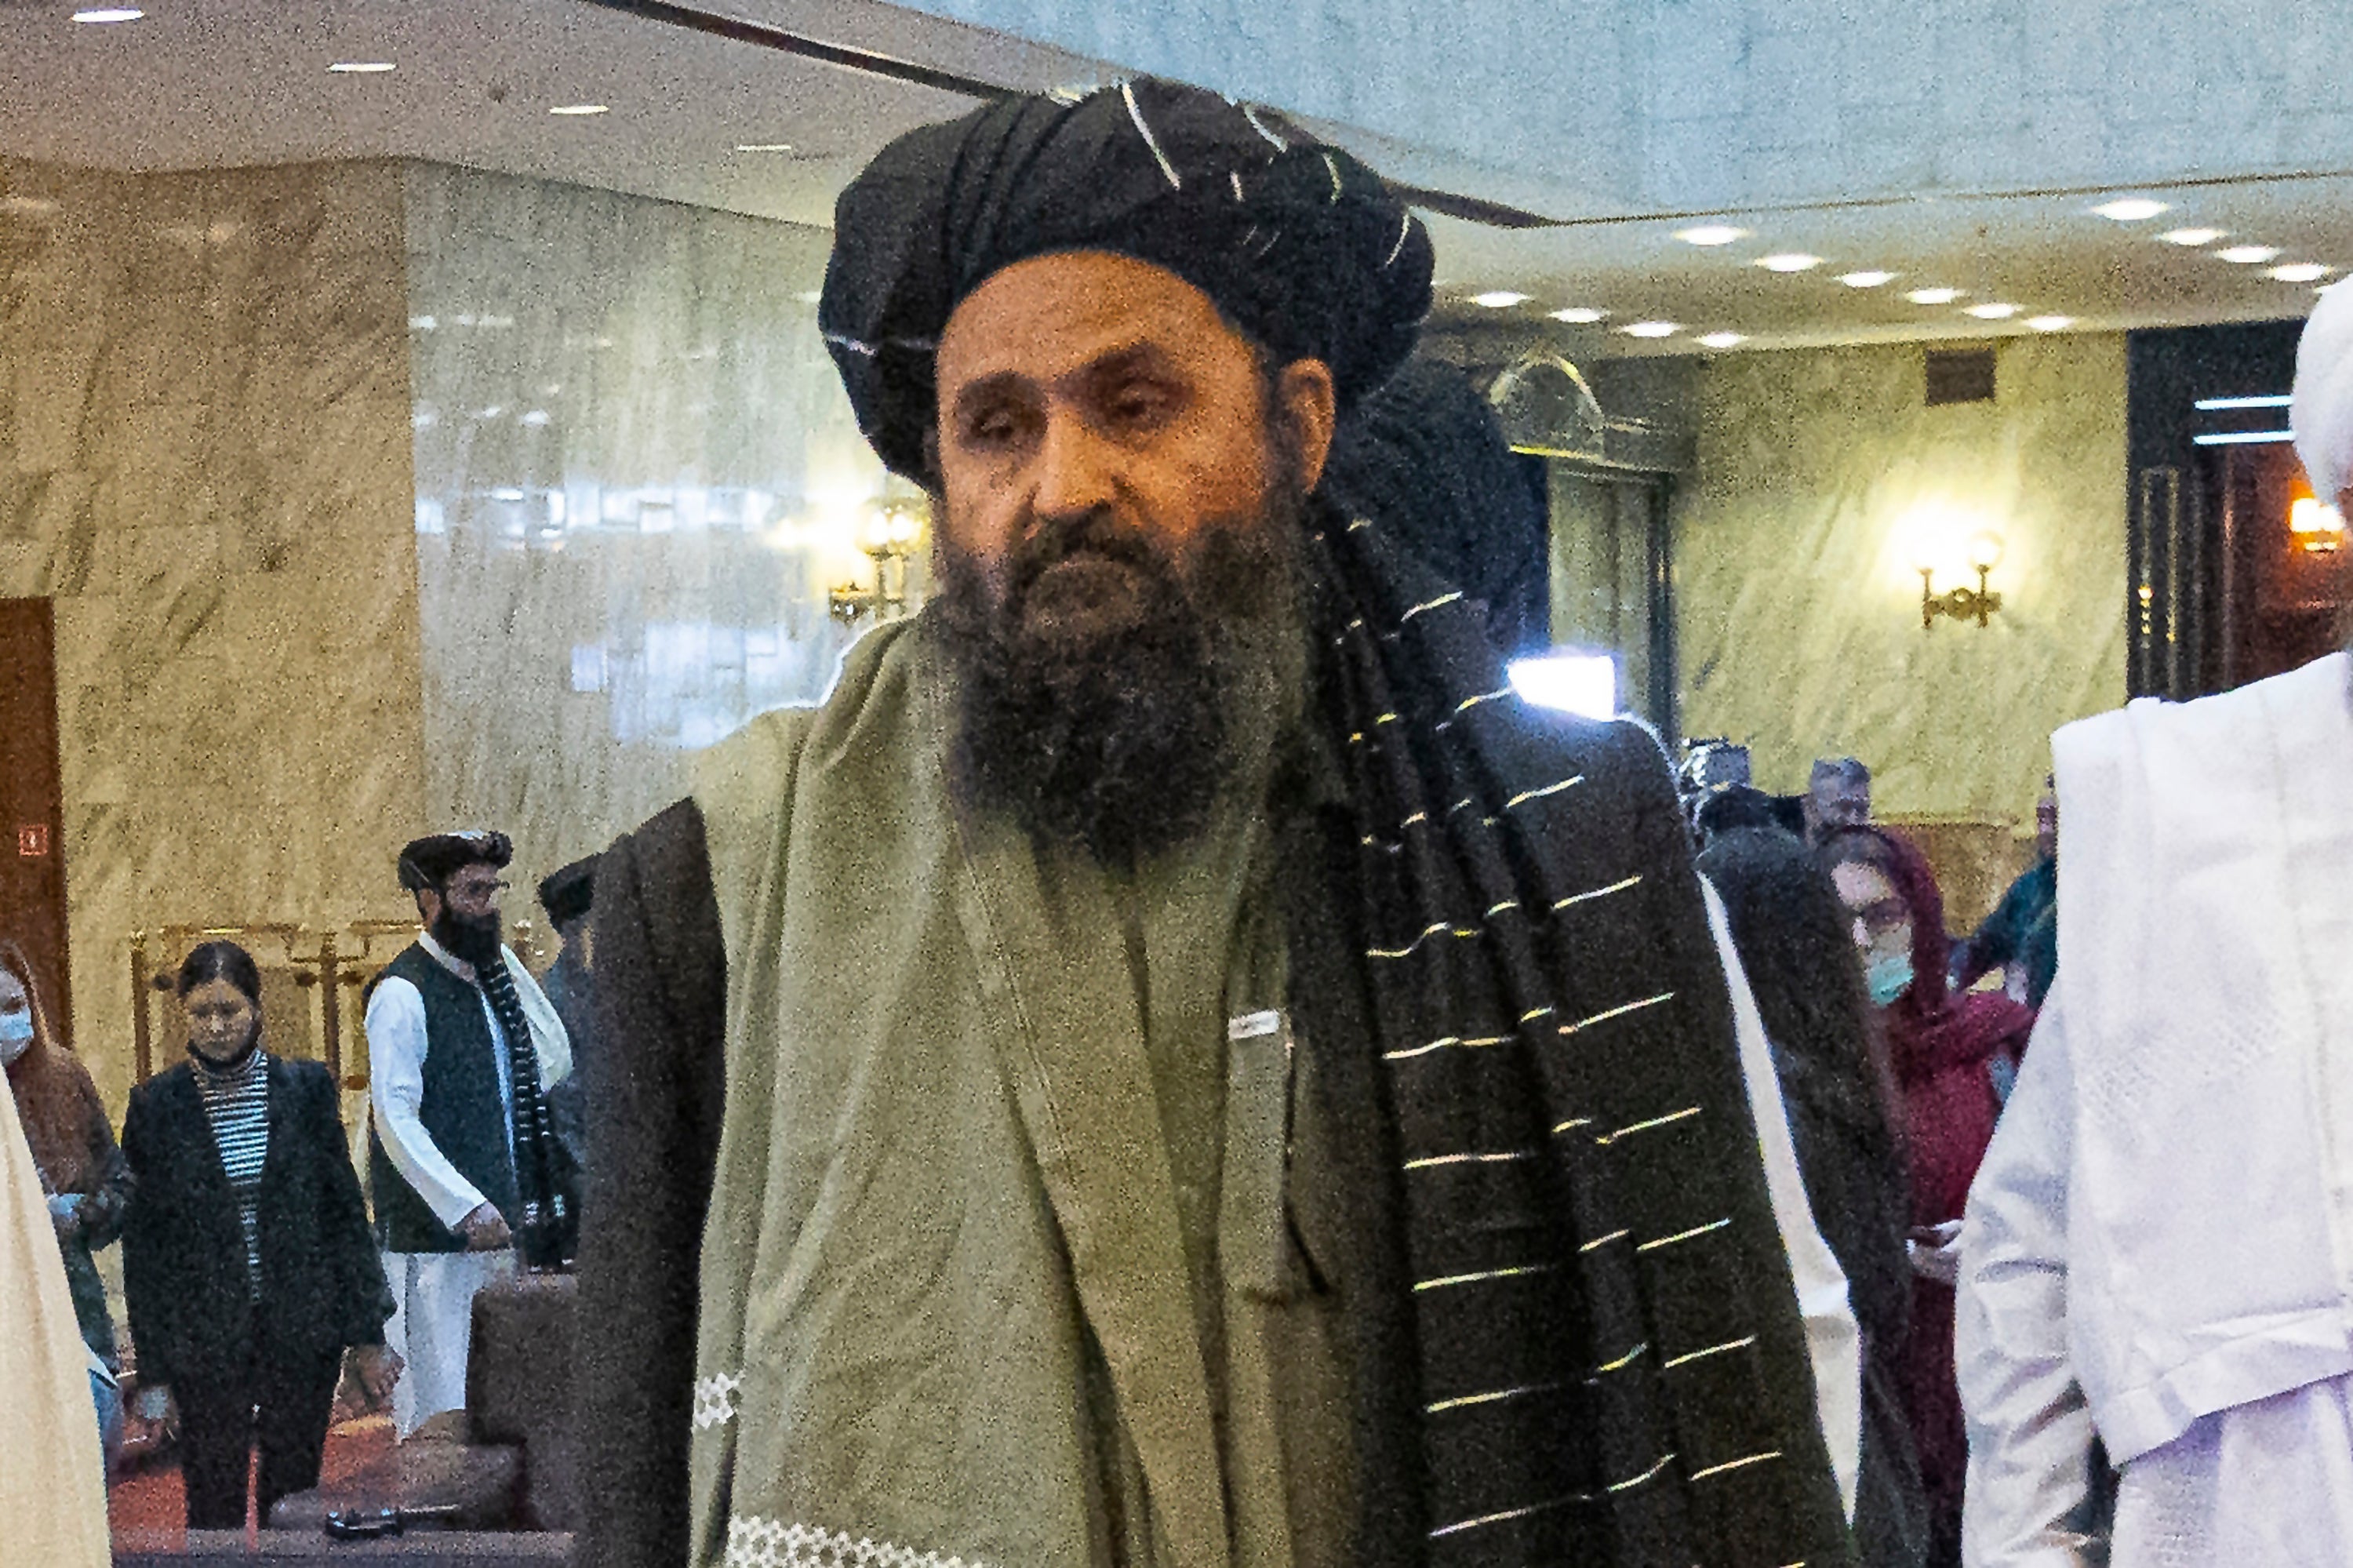 Mullah Abdul Ghani Baradar, the co-founder of the Taliban, arrived in Kabul today ahead of talks on establishing a new government in Afghanistan